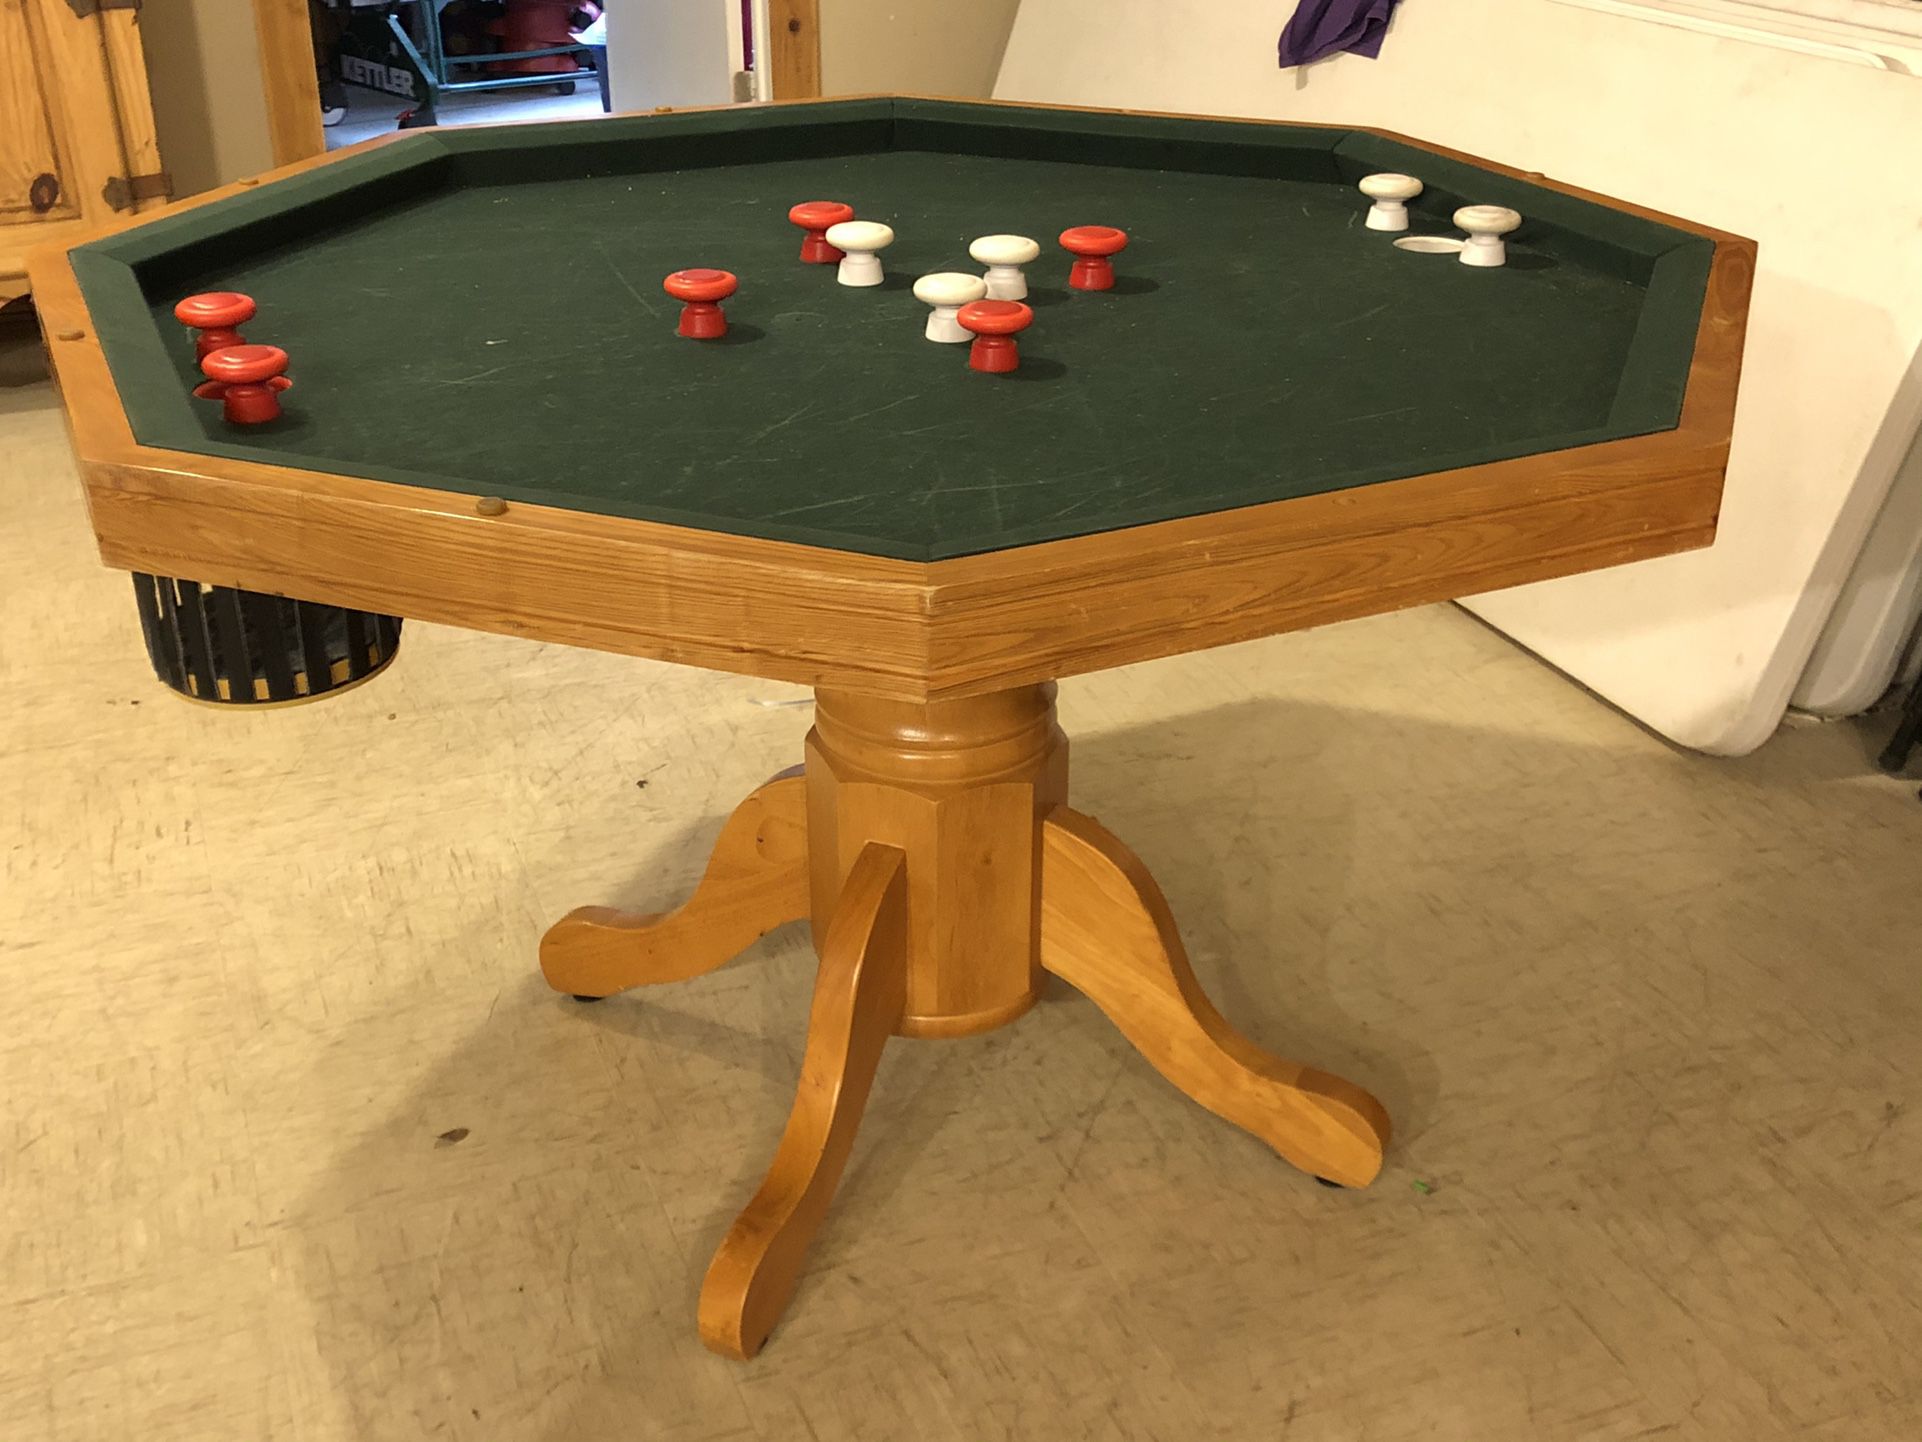 3-in-1 Octagonal Game Table